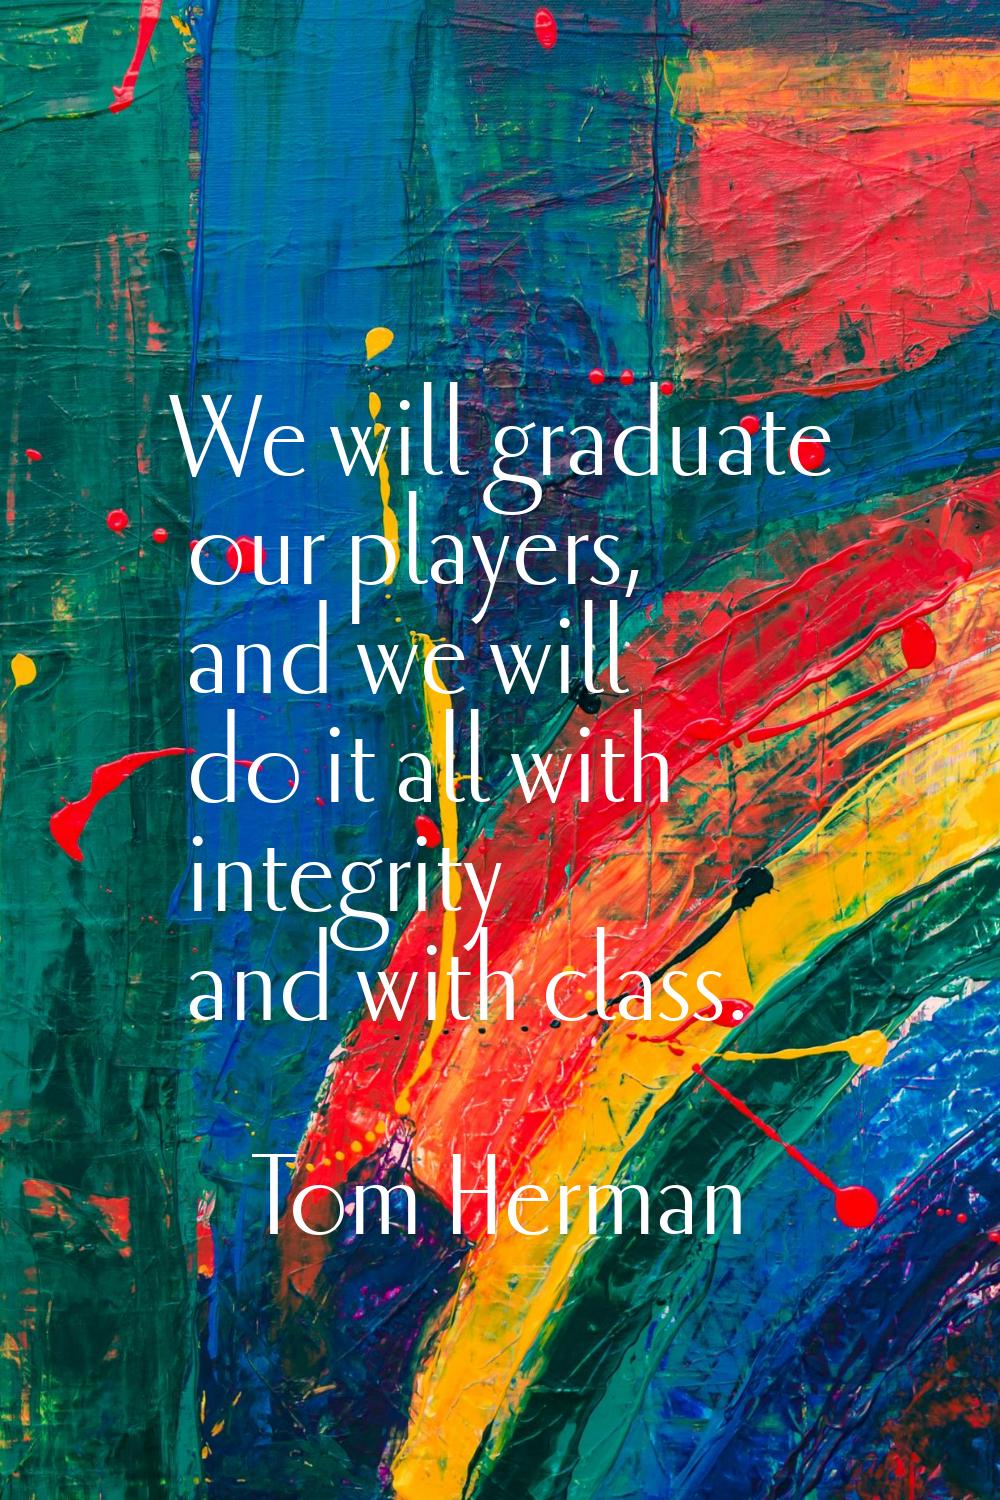 We will graduate our players, and we will do it all with integrity and with class.